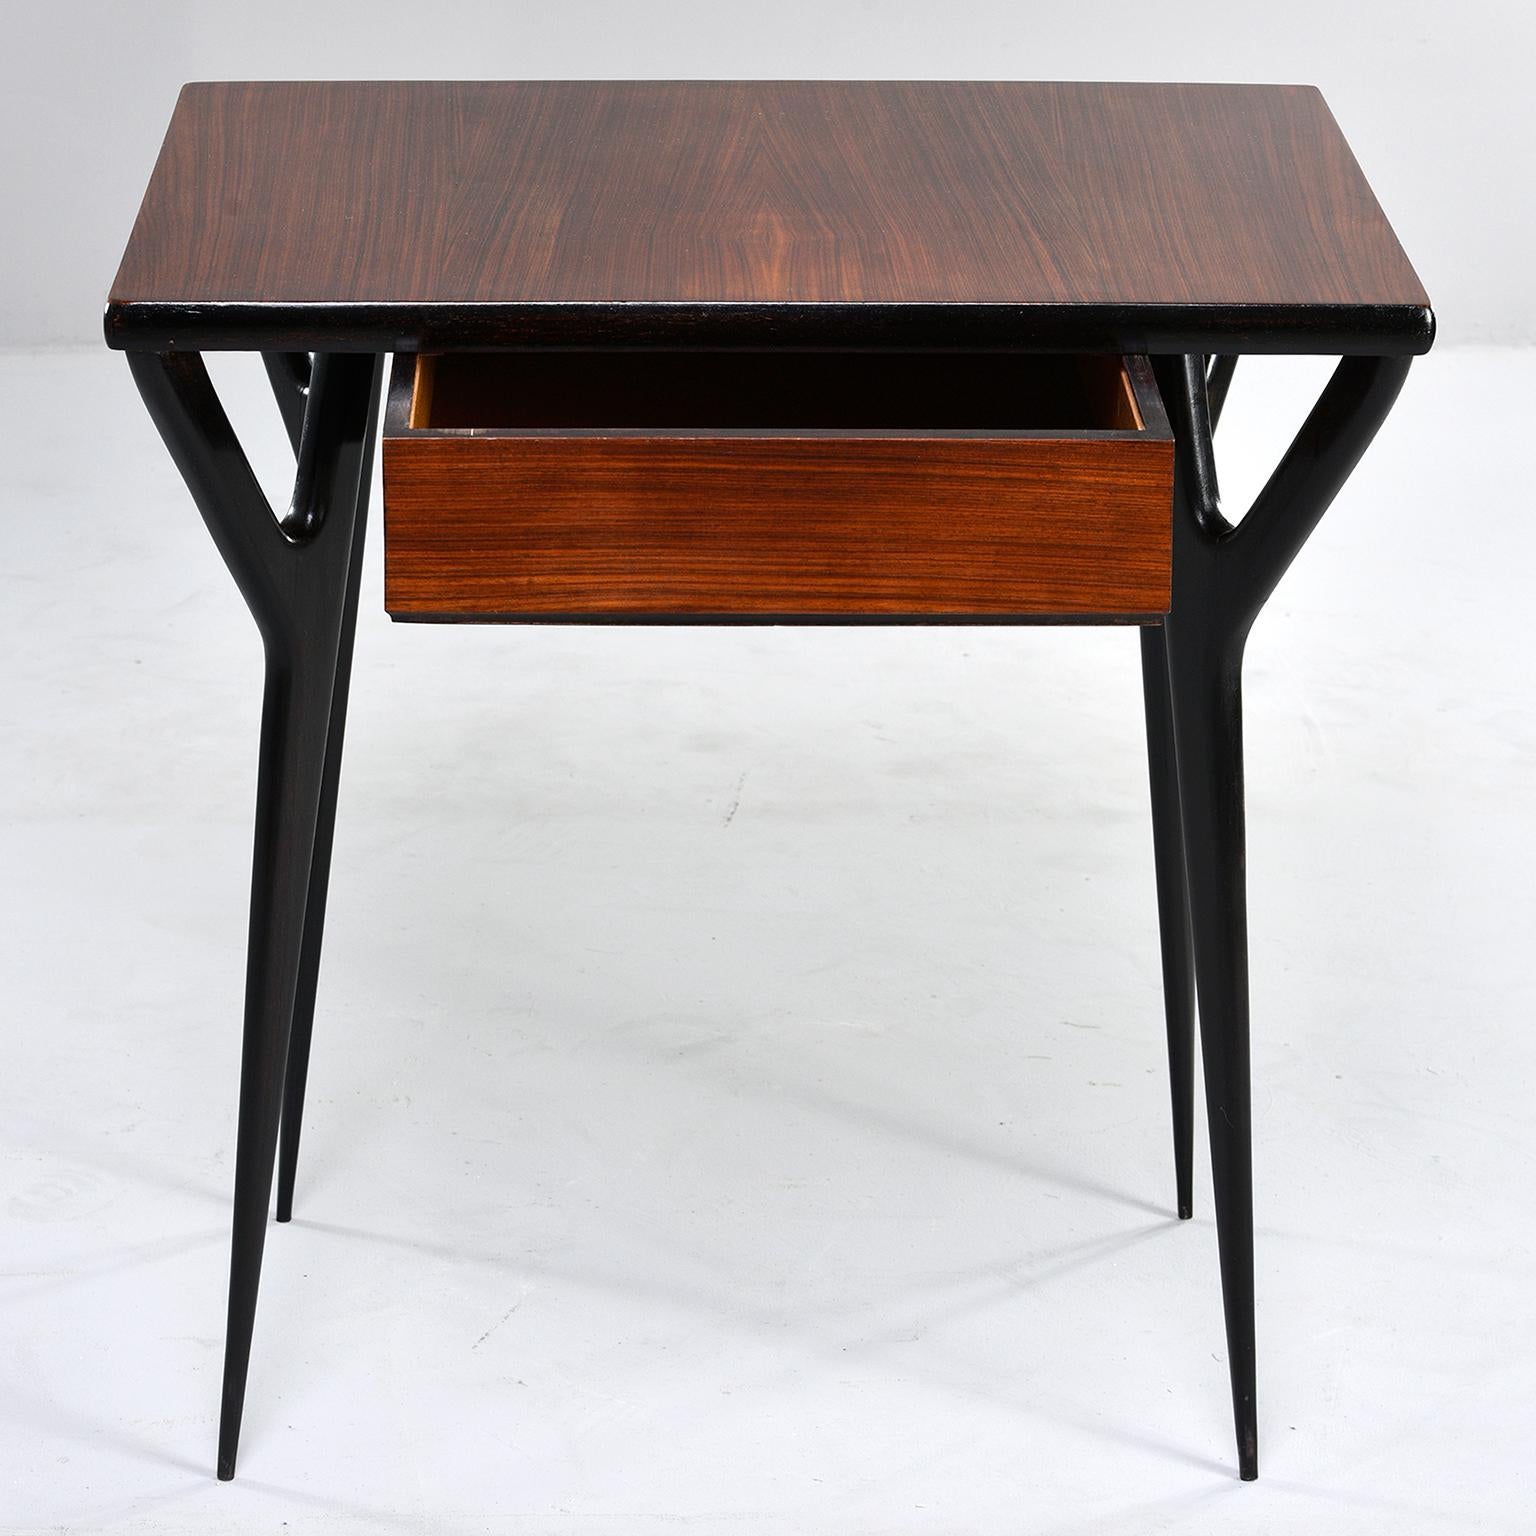 Italian desk or writing table has wishbone style tapered ebonised legs and side supports and contrasting wood top with single centre drawer, circa early 1960s. Measures: Knee height is 25.75